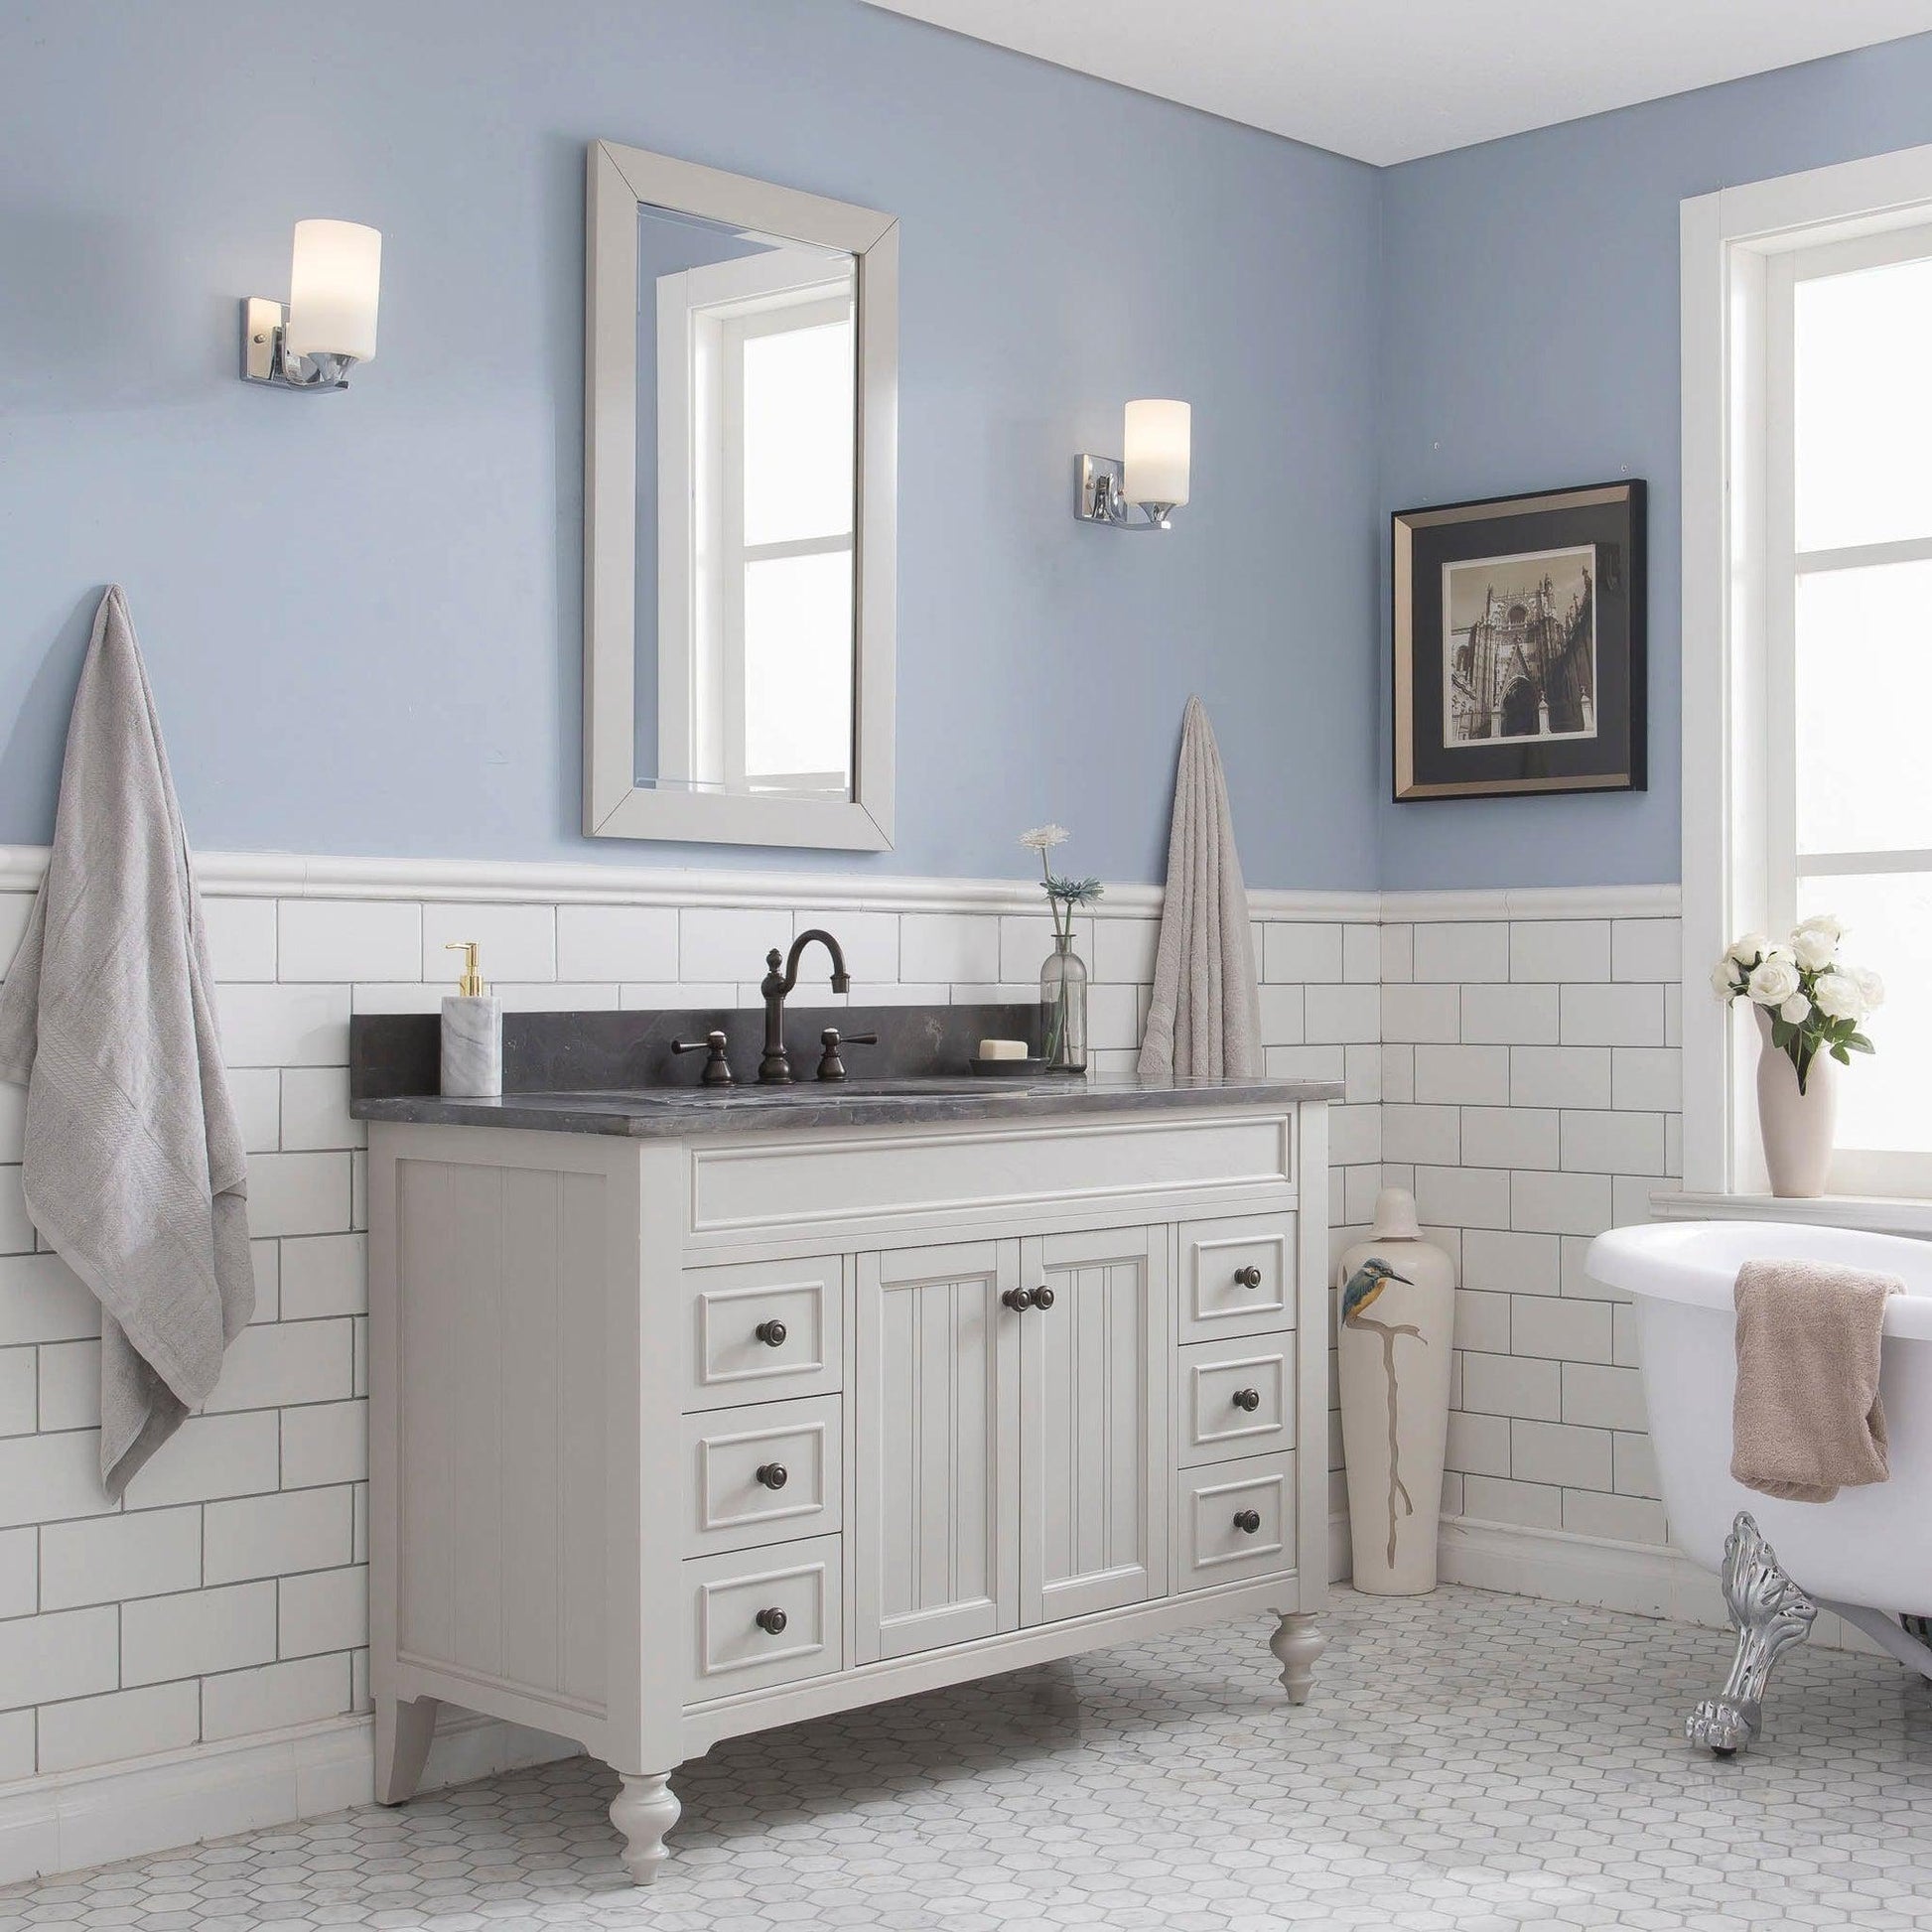 Water Creation Potenza 48" Bathroom Vanity in Earl Grey with Blue Limestone Top with Faucet